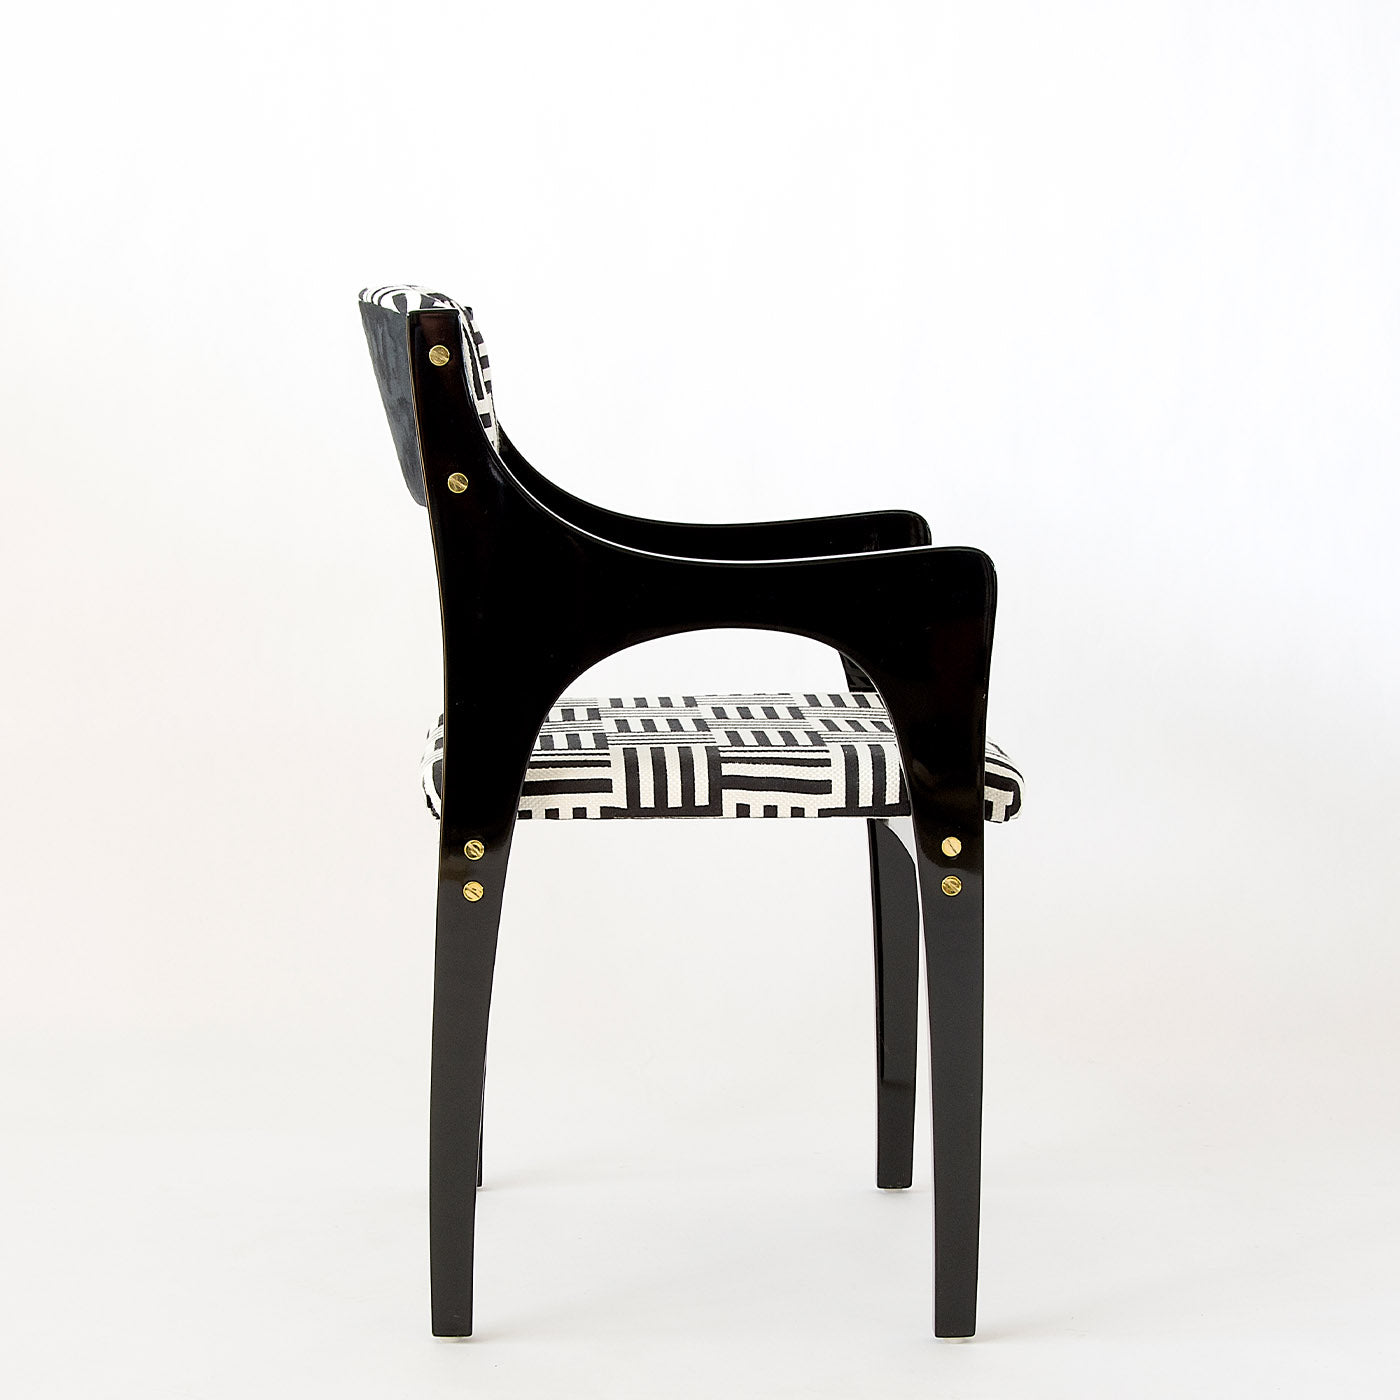 Lola 50's-Inspired Black & White Chair With Arms - Alternative view 2